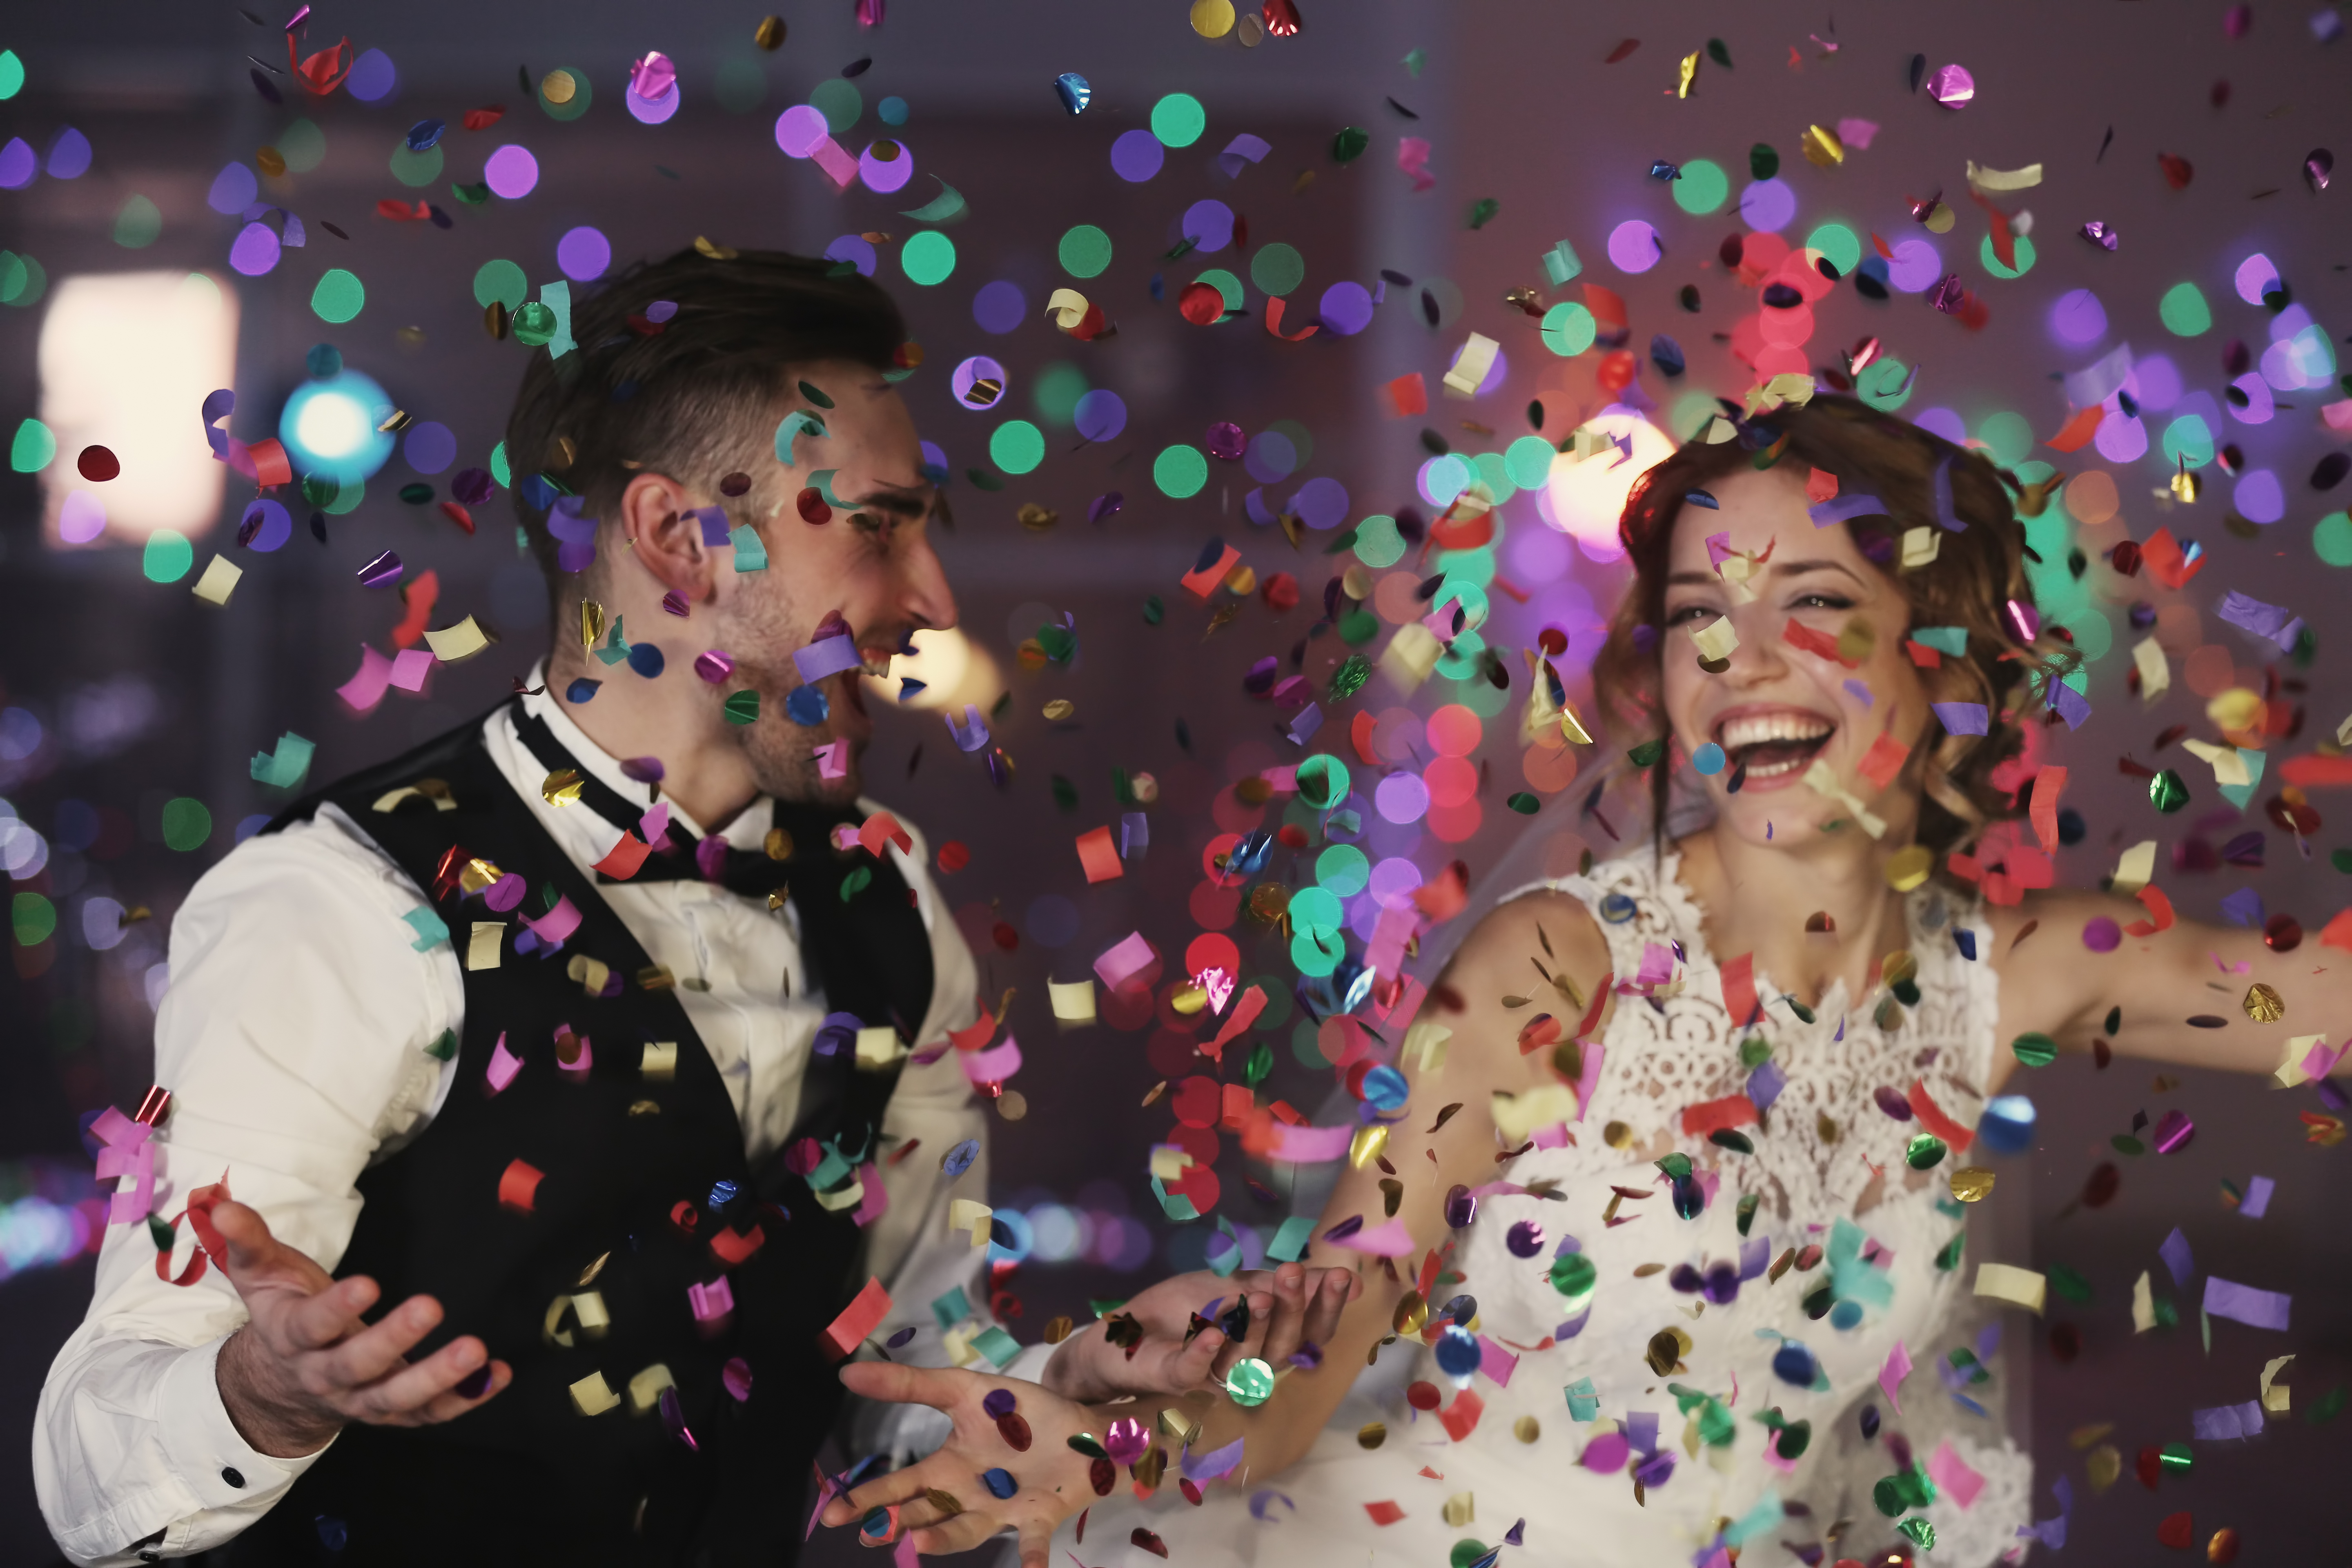 7 Best Wedding Entrance Songs for the Bride and Groom